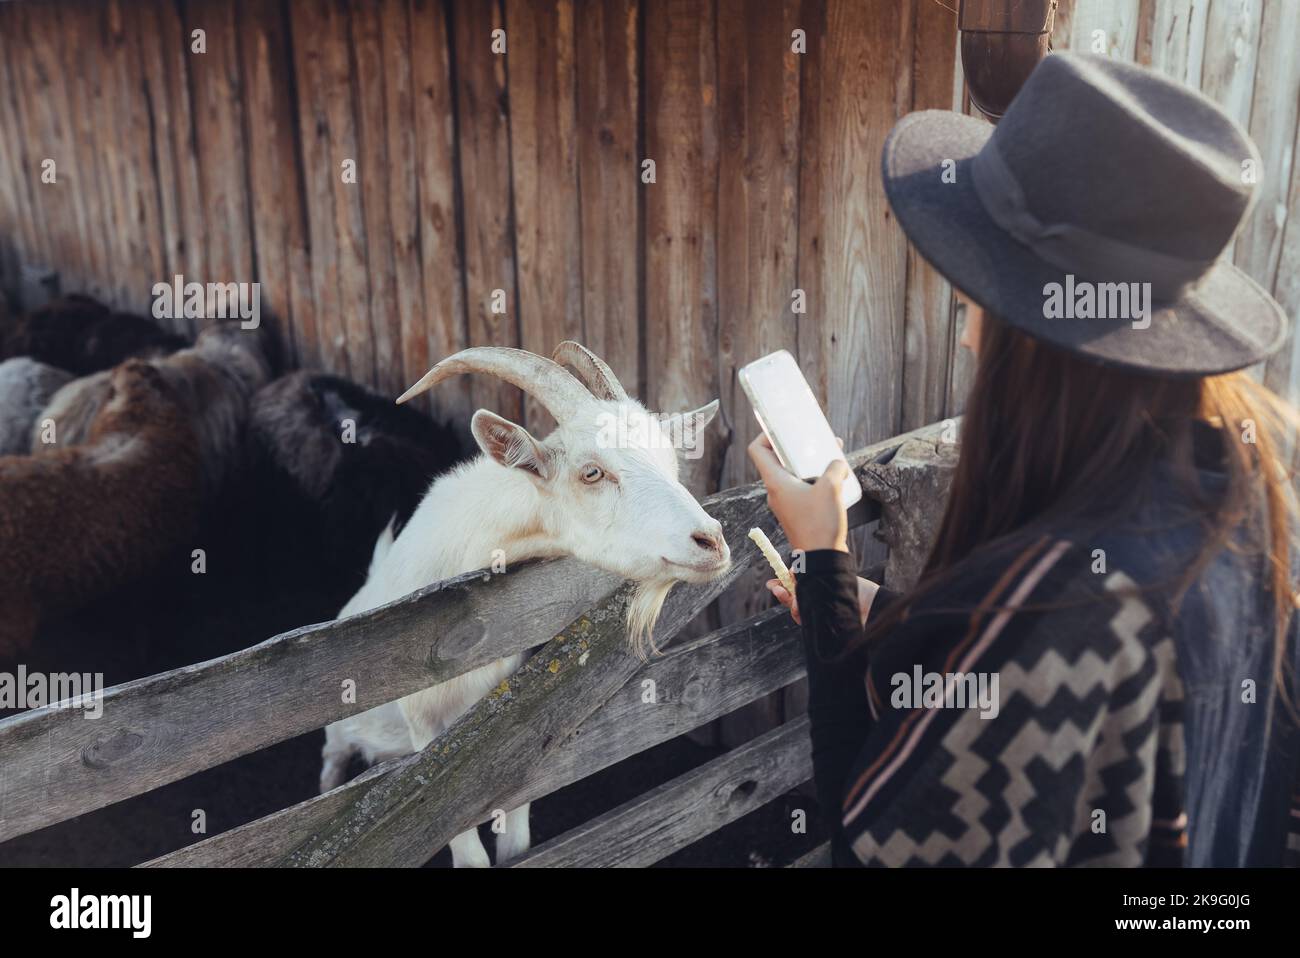 Woman takes a photo of a goat on her smartphone. Stock Photo